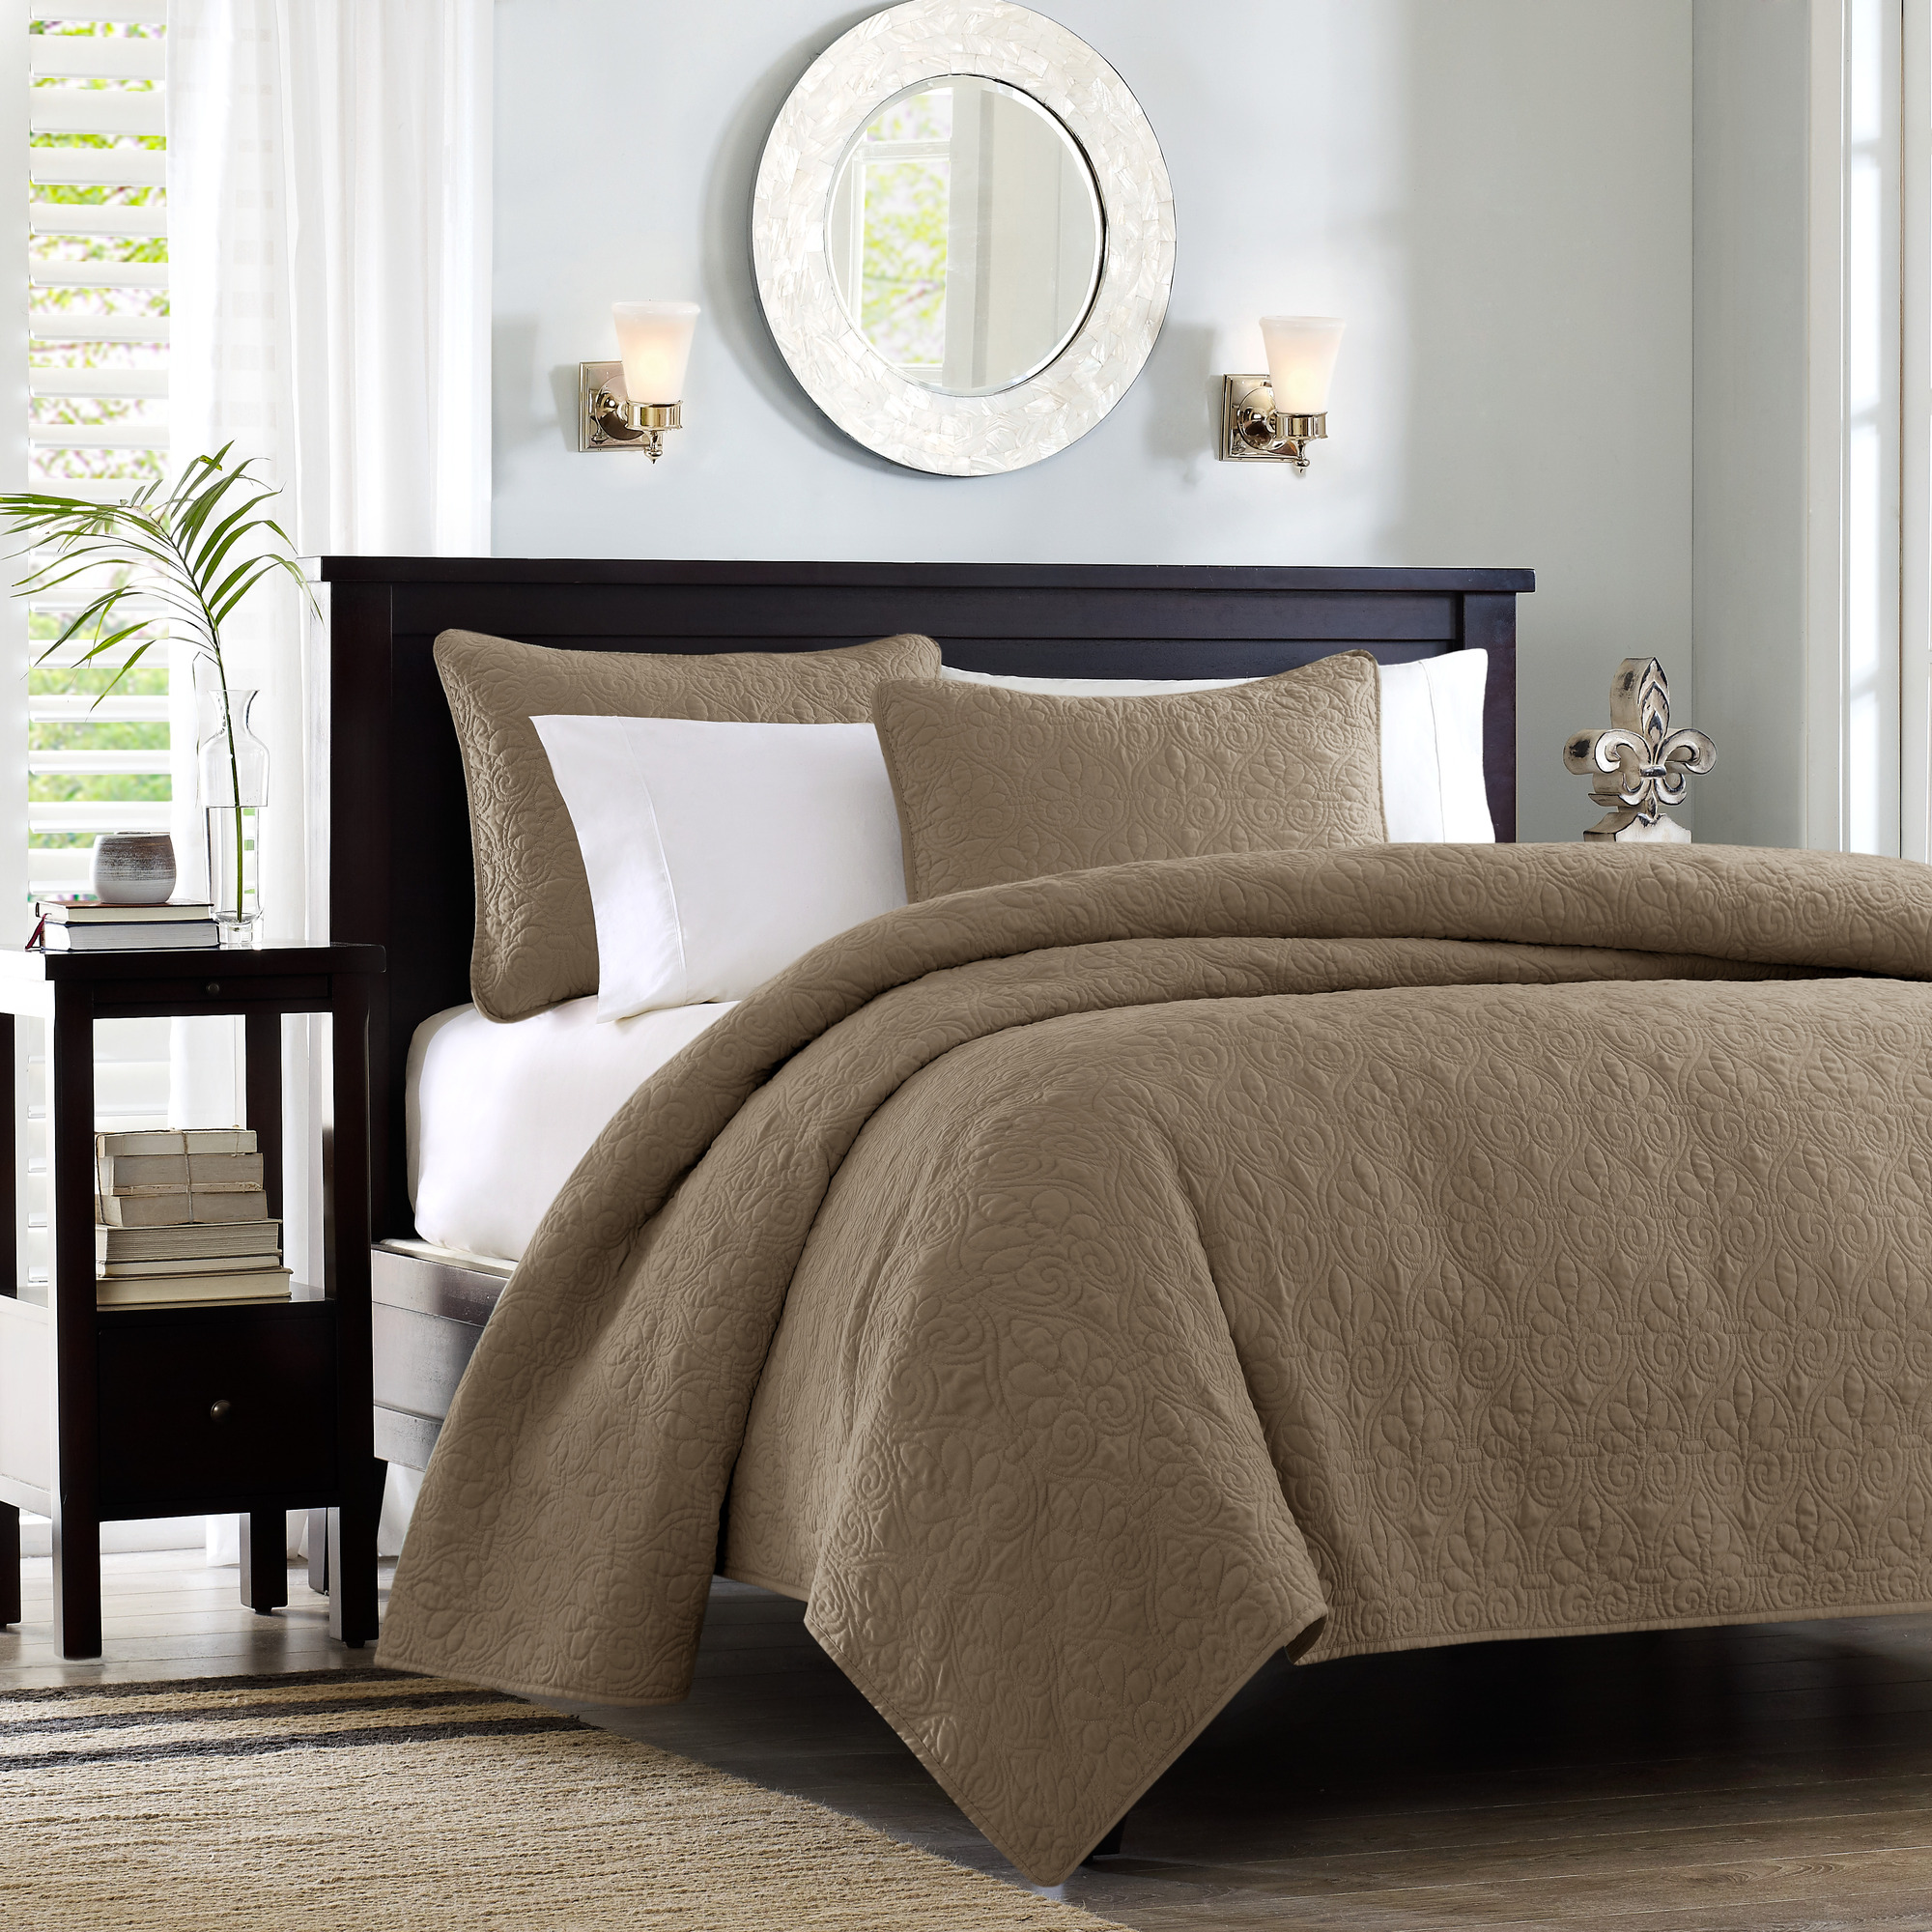 Home Essence Vancouver Super Soft Reversible Coverlet Set, Brown, Twin/Twin XL - image 1 of 12